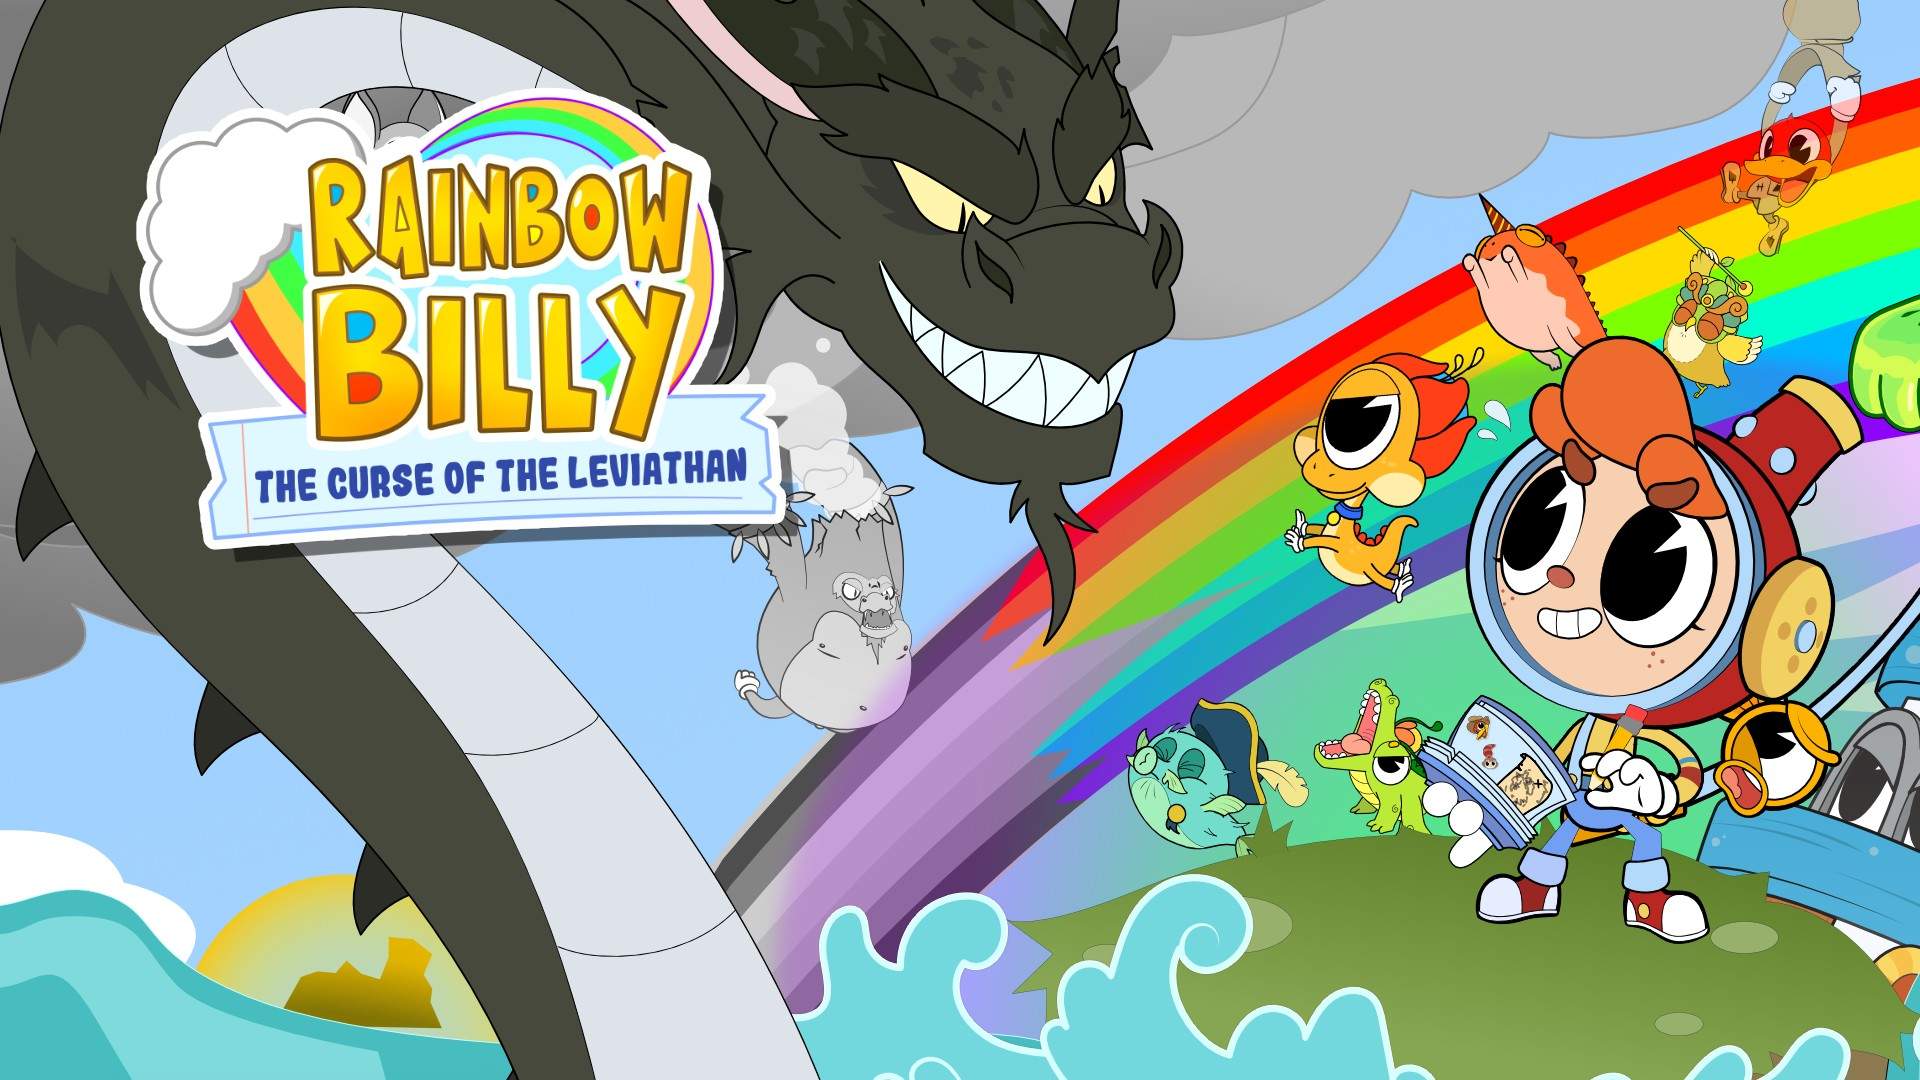 Video For Help Everyone’s True Colors Shine in Rainbow Billy: The Curse of the Leviathan